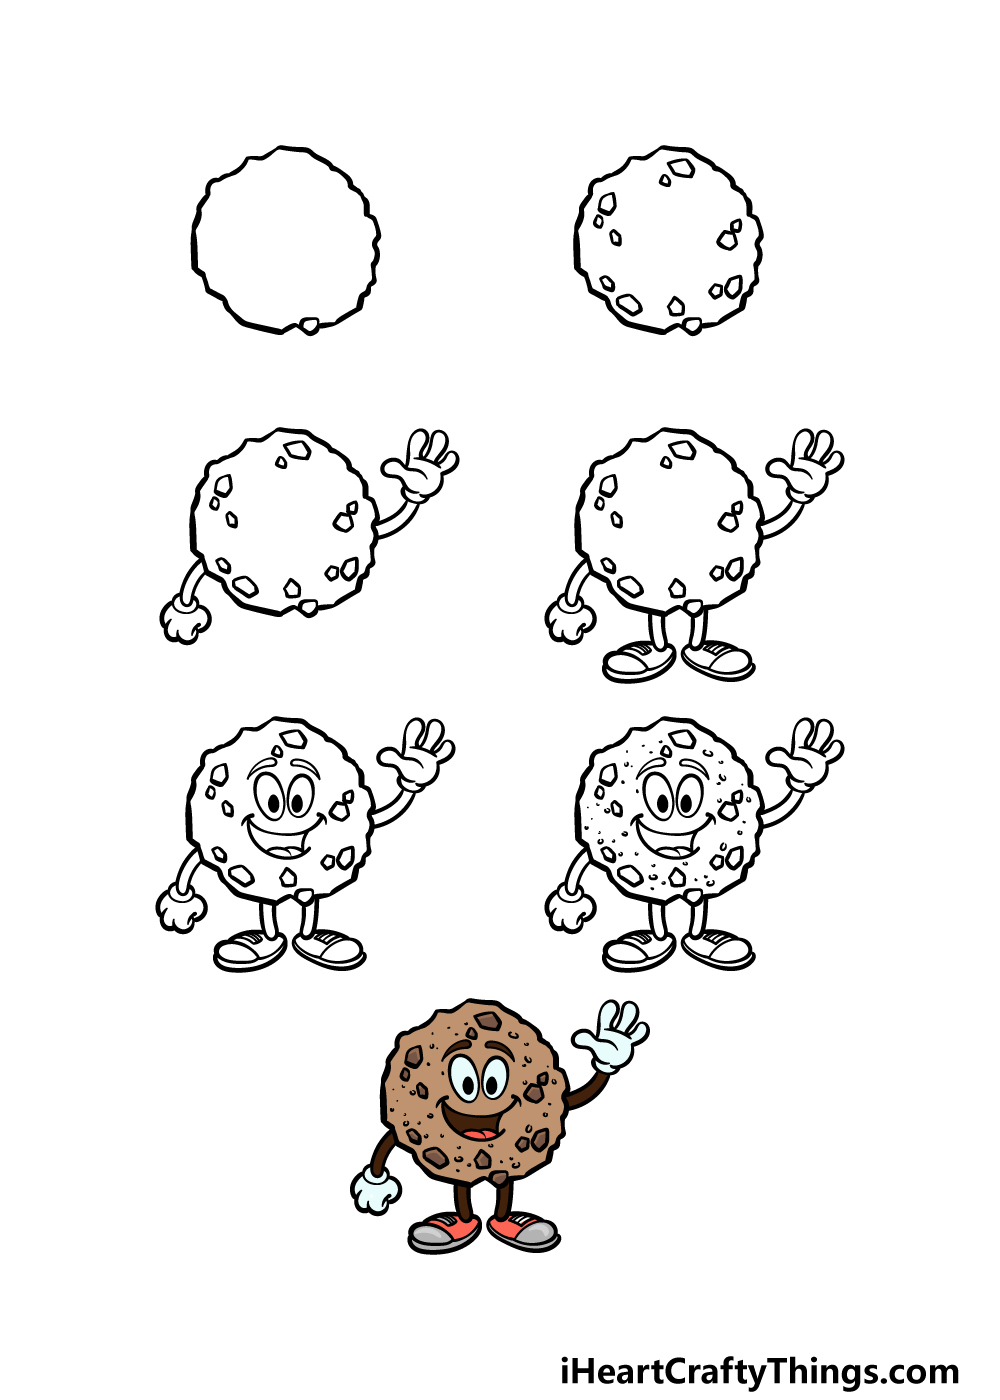 how to draw a cartoon cookie in 7 steps